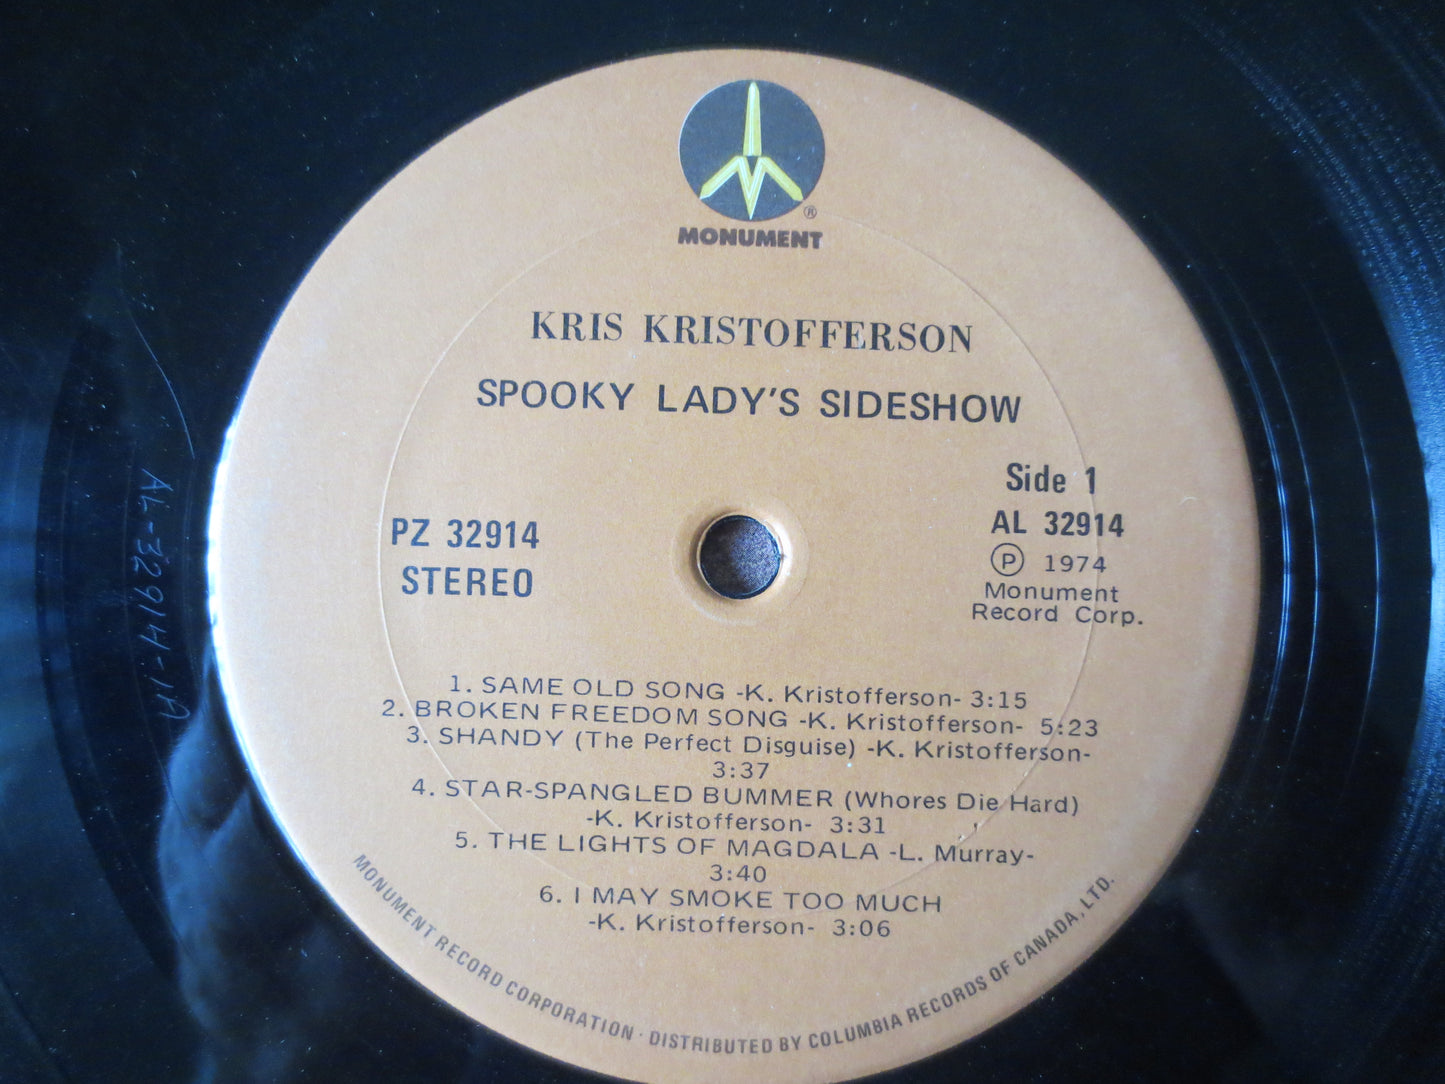 KRIS KRISTOFFERSON, SPOOKY Lady's Sideshow, Kristofferson, Vinyl Record, Vintage Vinyl, Record Vinyl, Records, 1974 Records